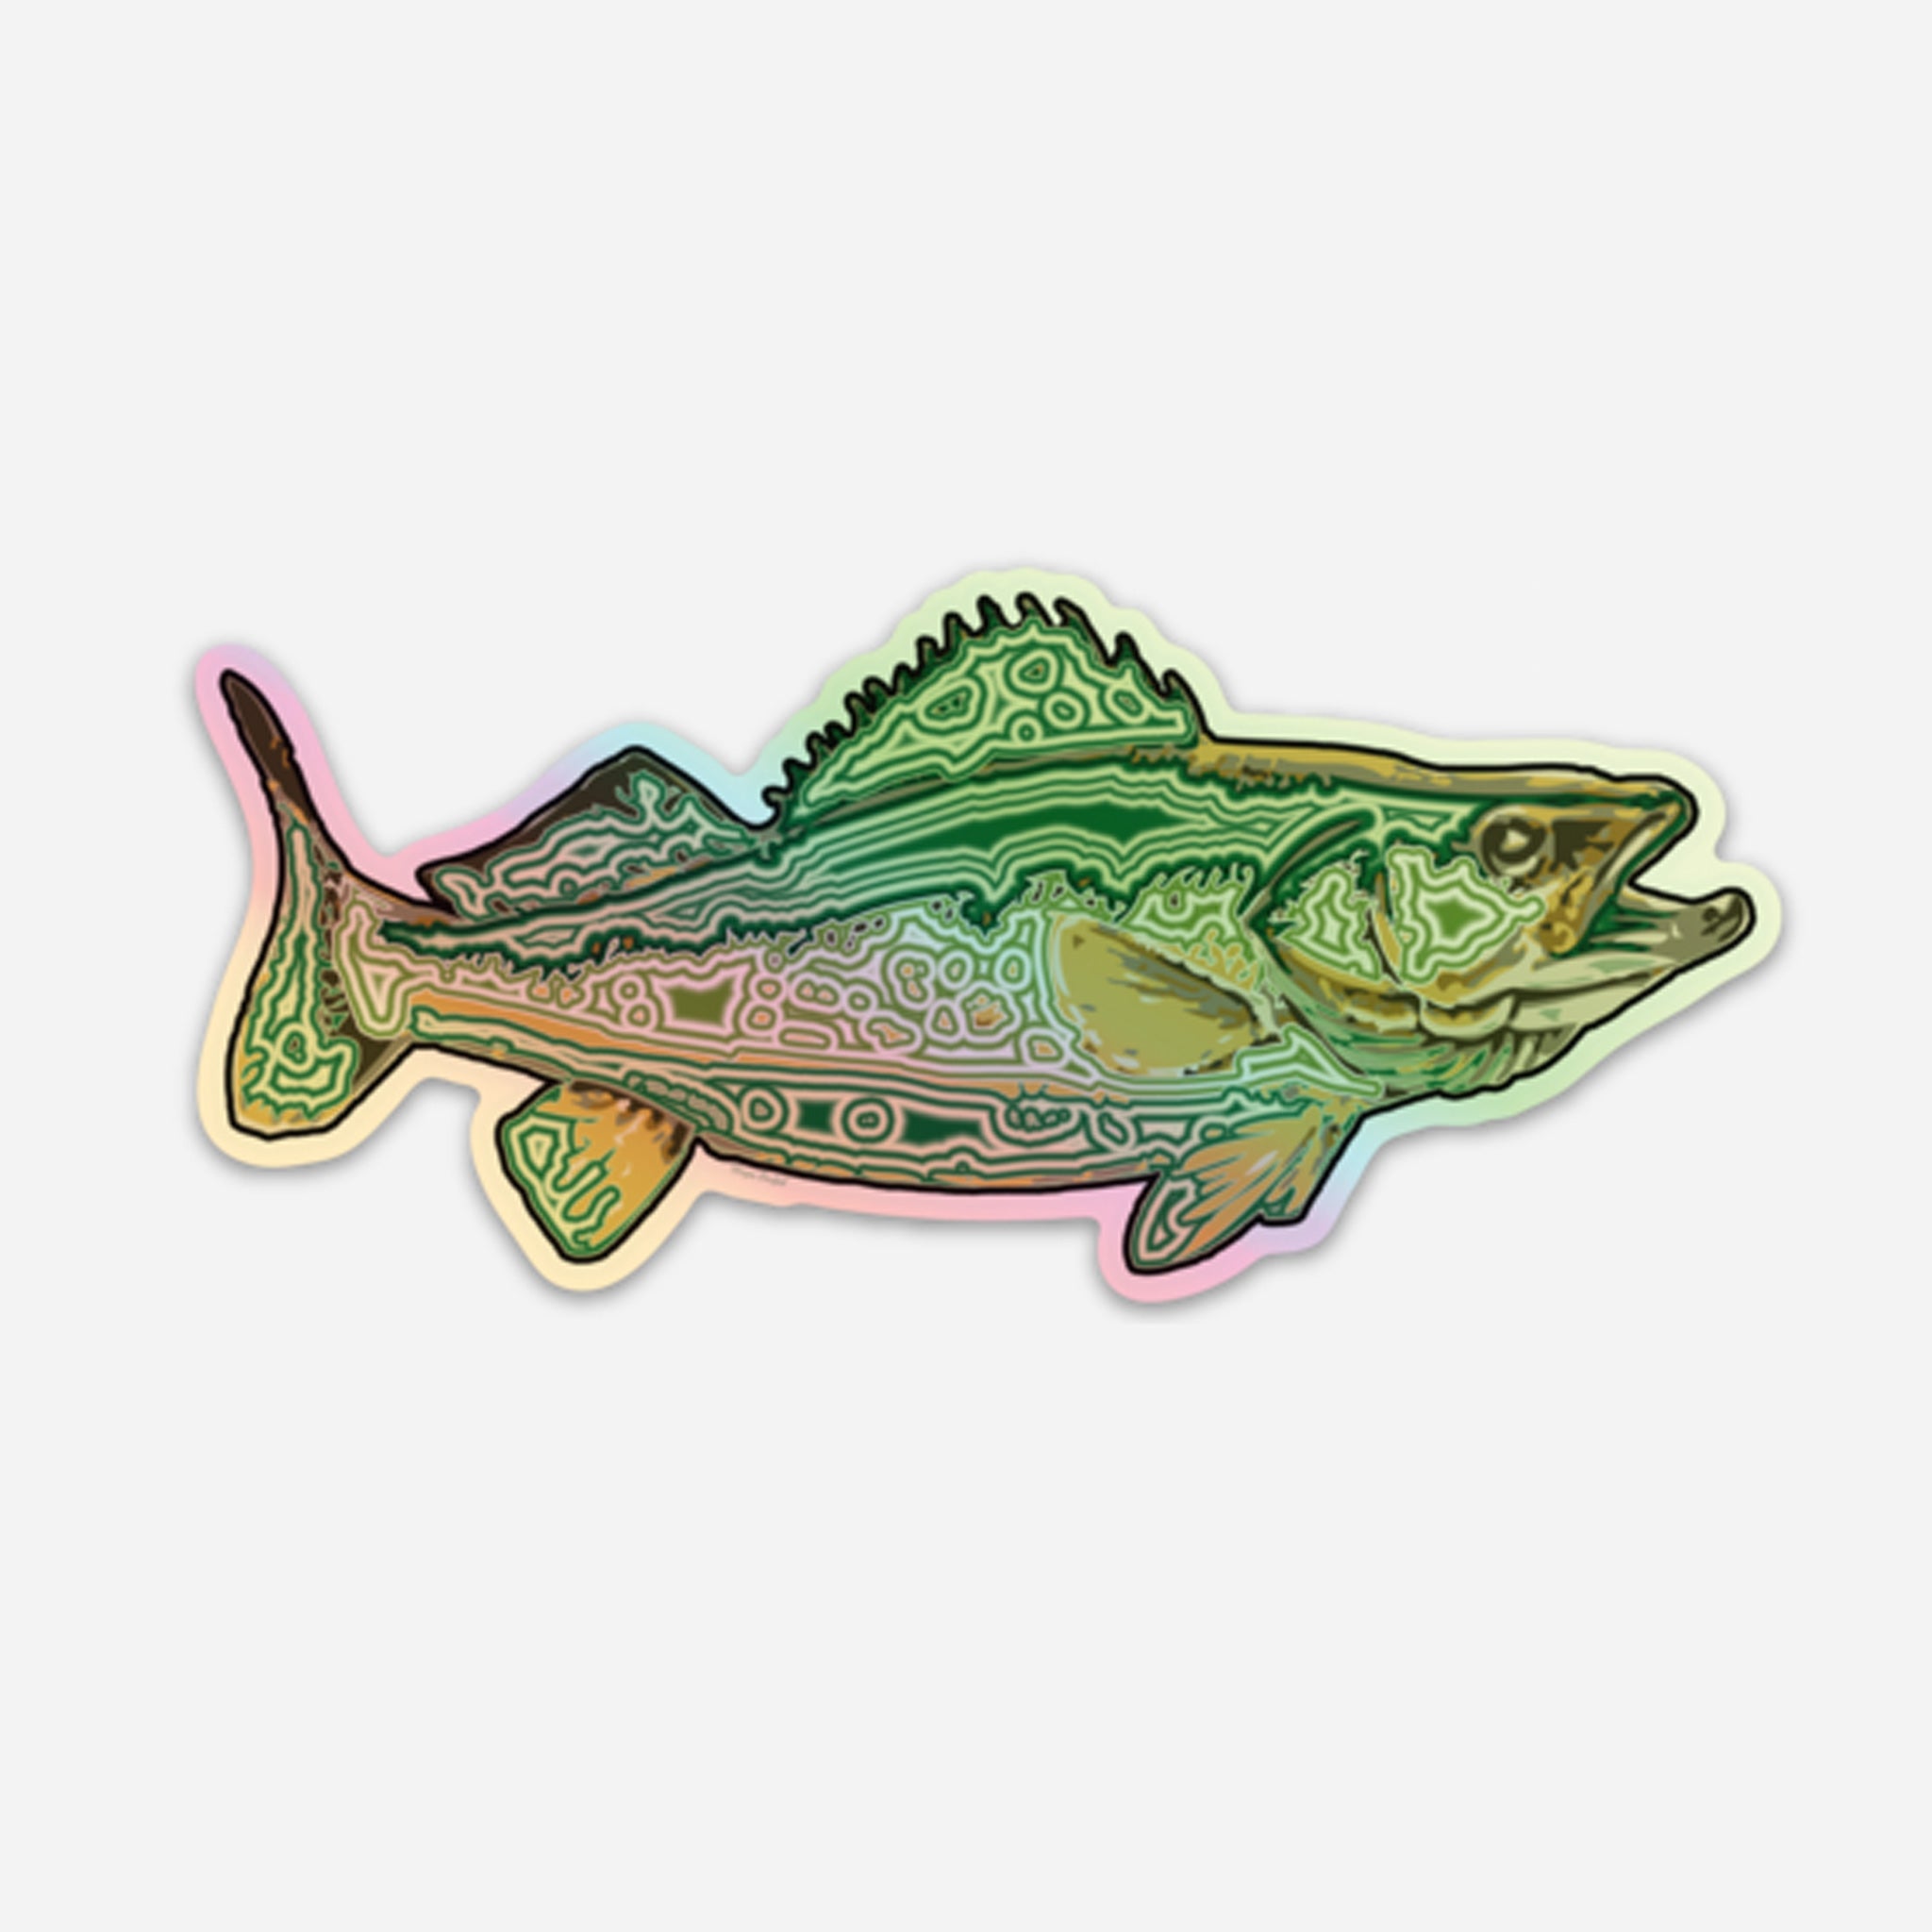 walleye fish on fishing decal – North 49 Decals